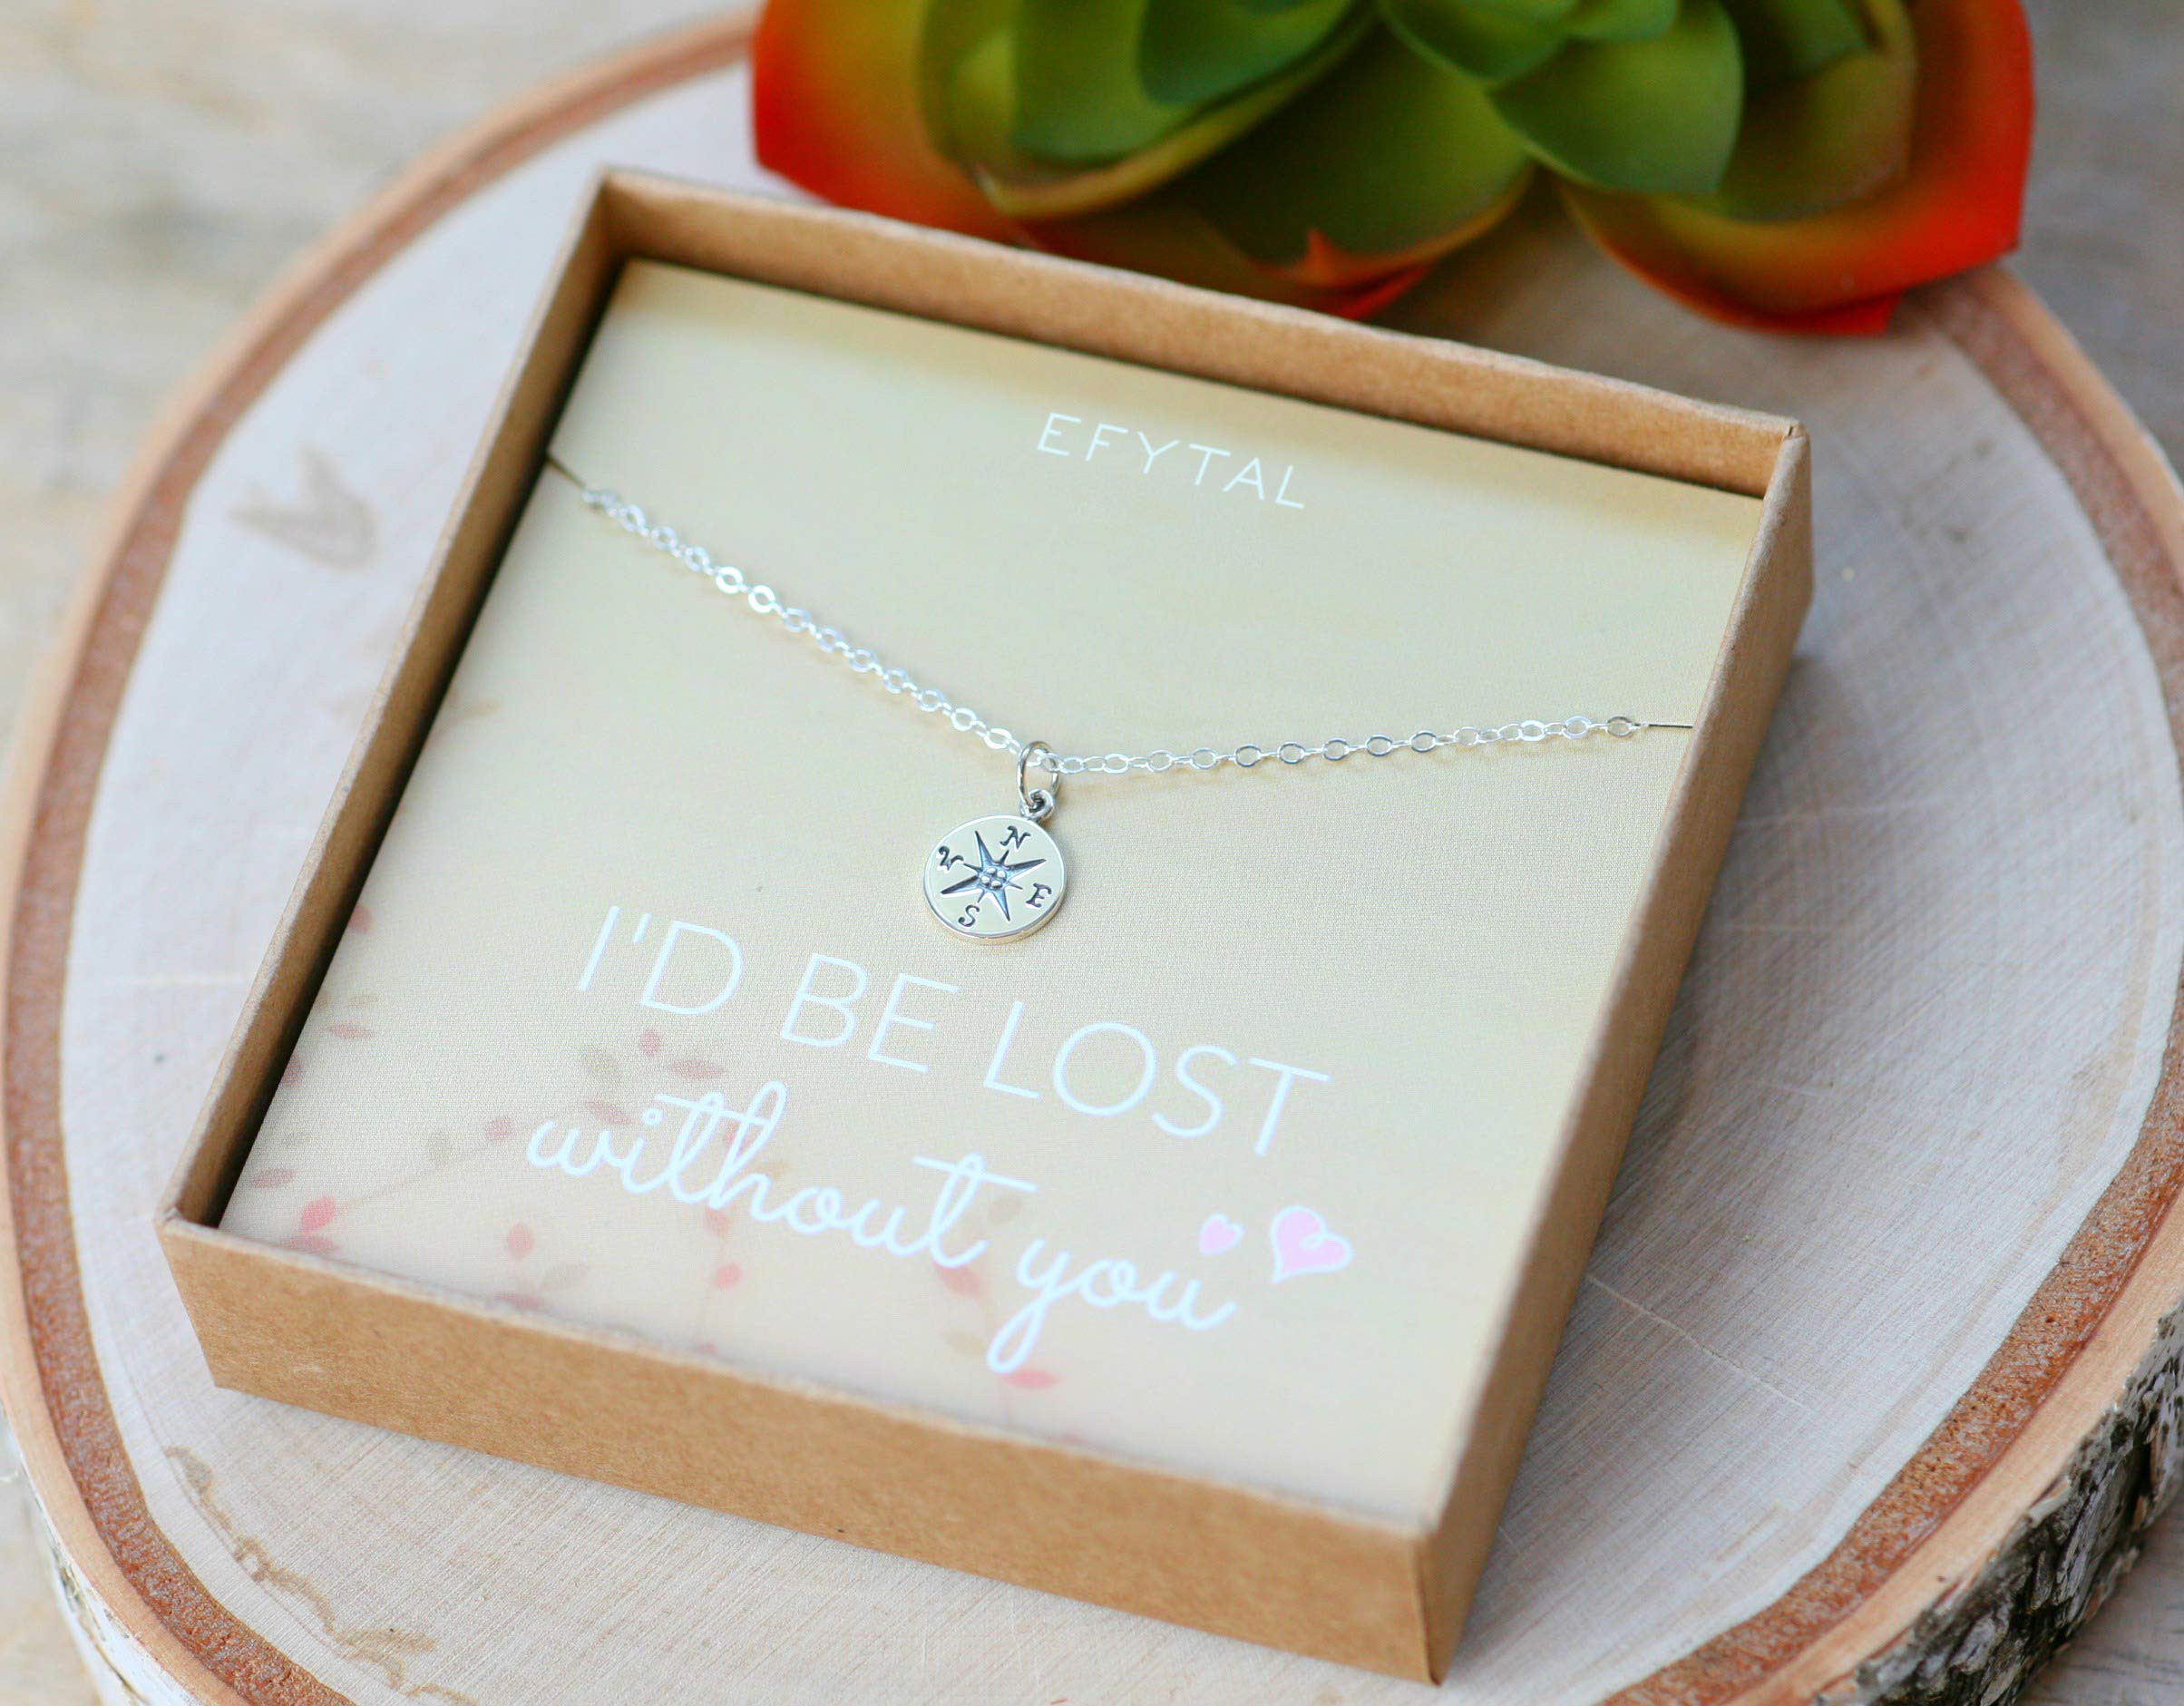 Girlfriend Jewelry Gift Ideas
 EFYTAL Necklace Gift for Girlfriend Wife Sterling